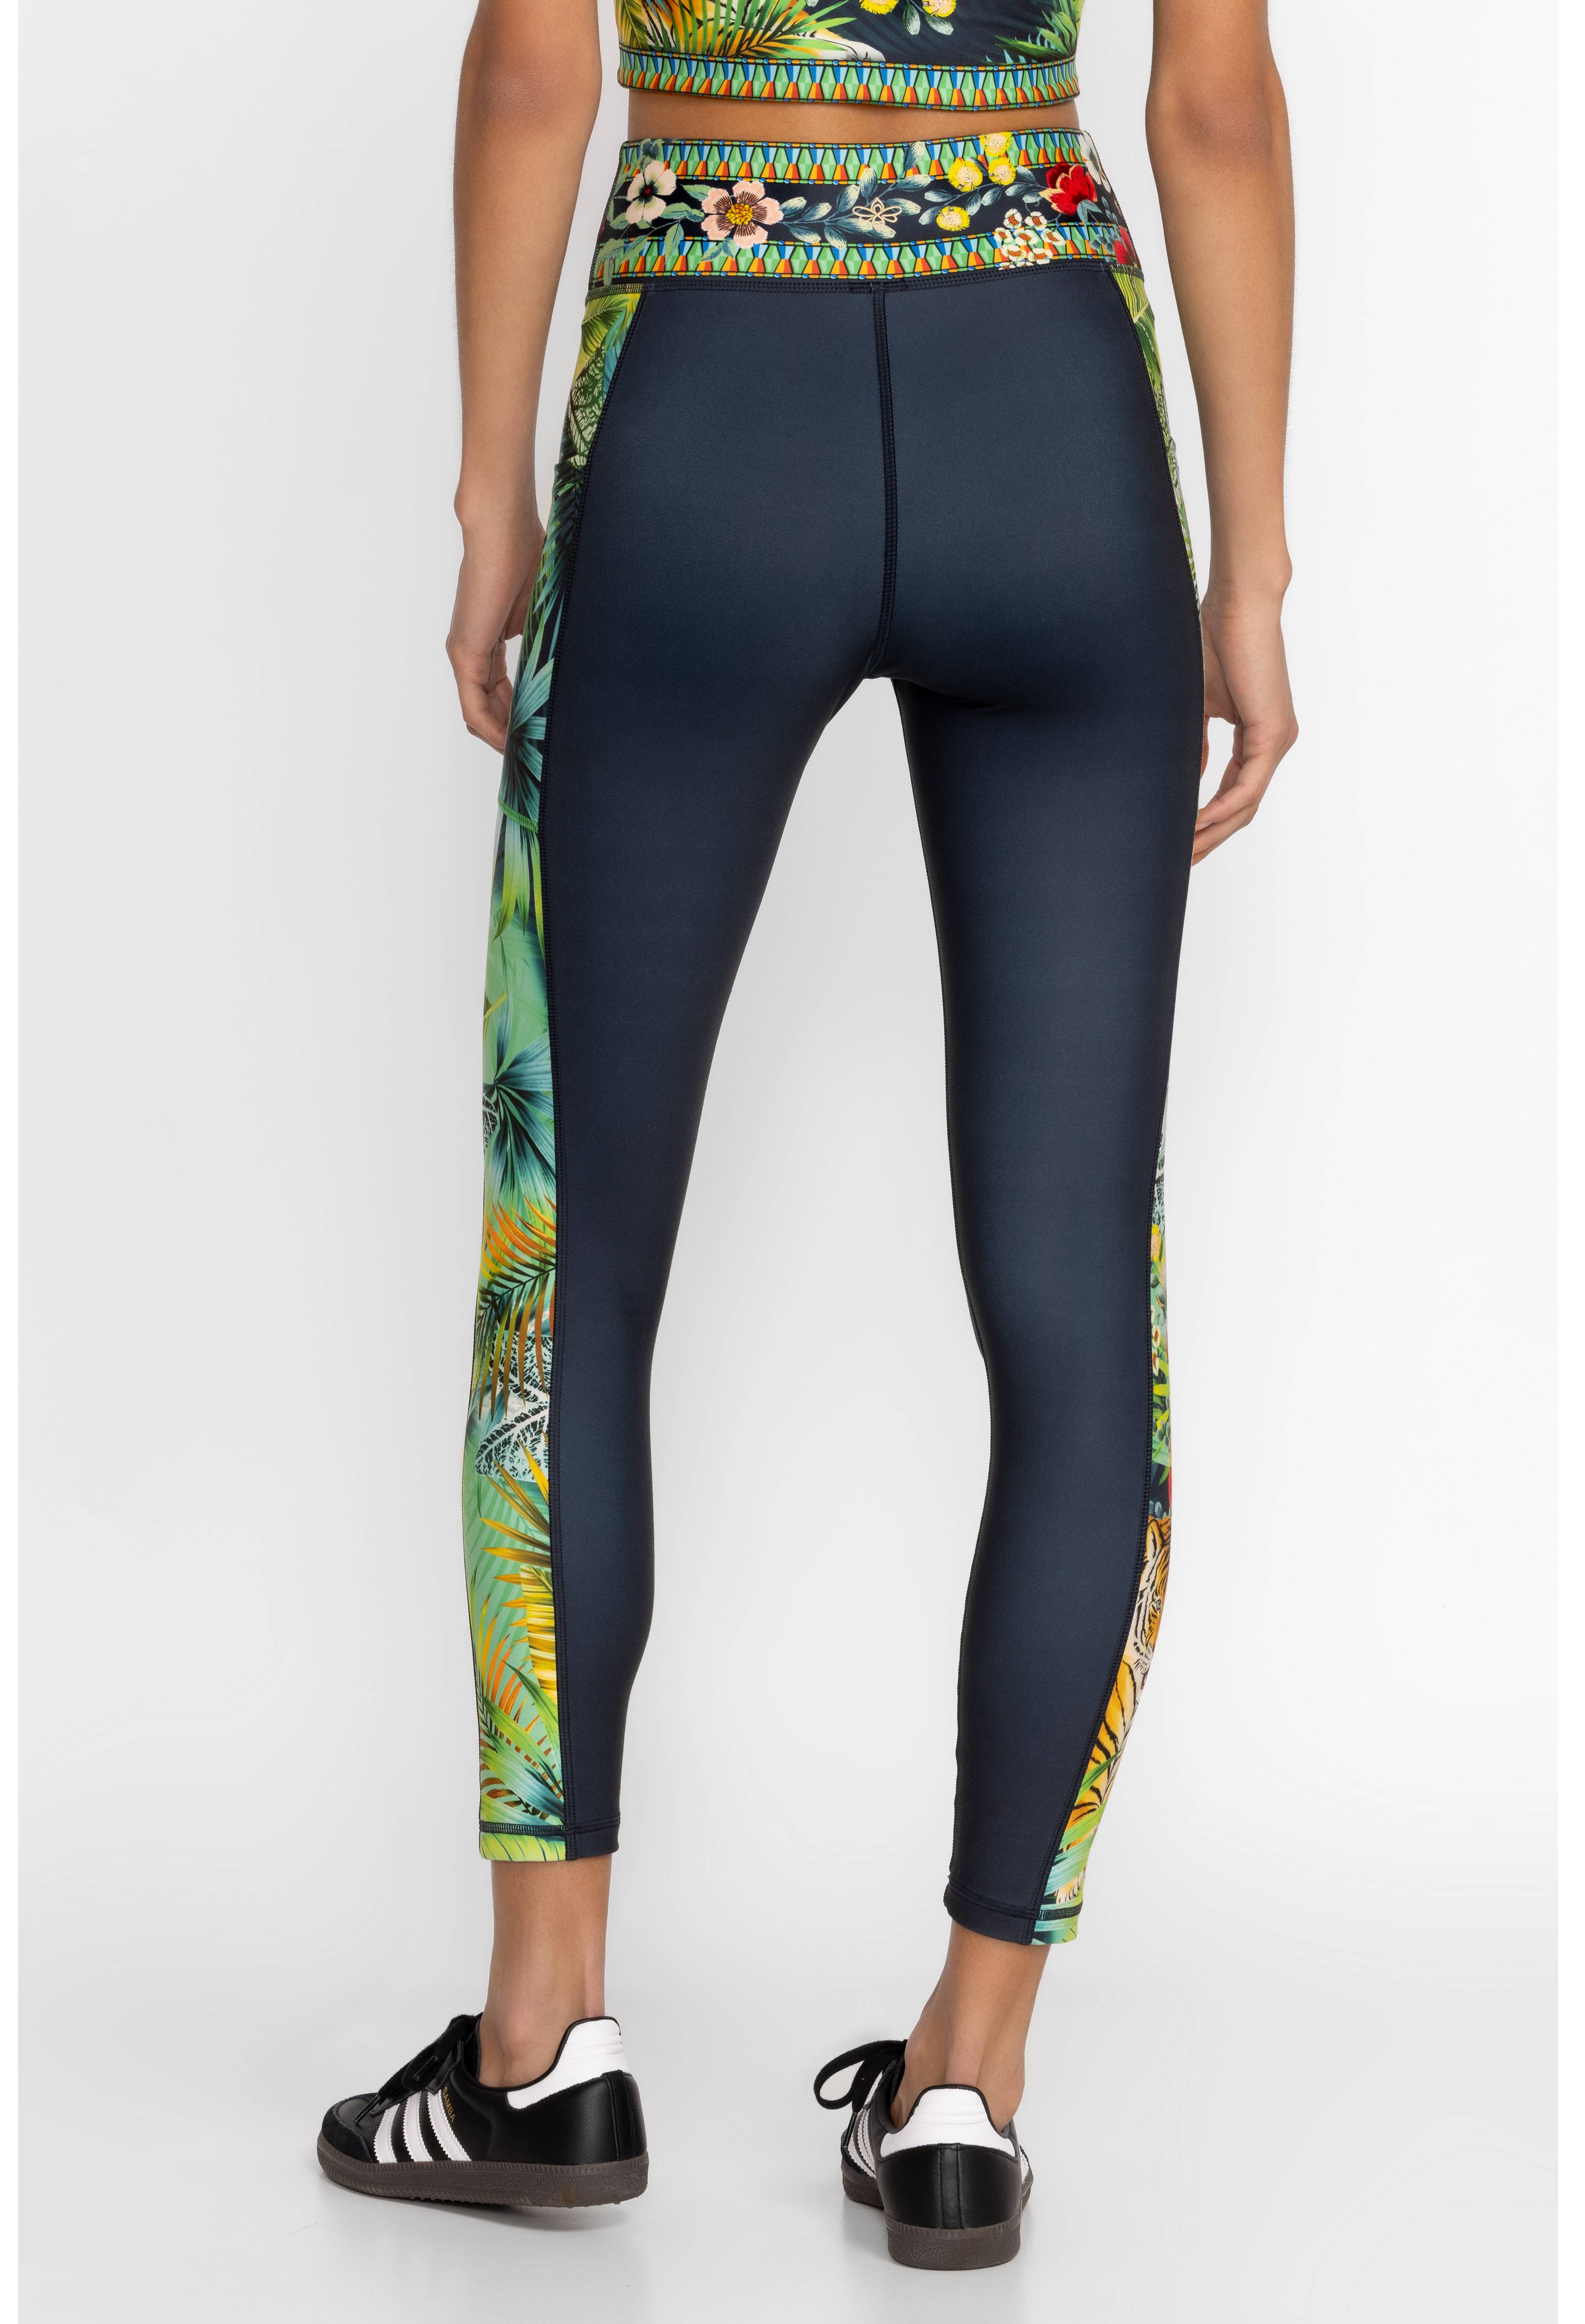 Bee Active Legging With Pockets, , large image number 4